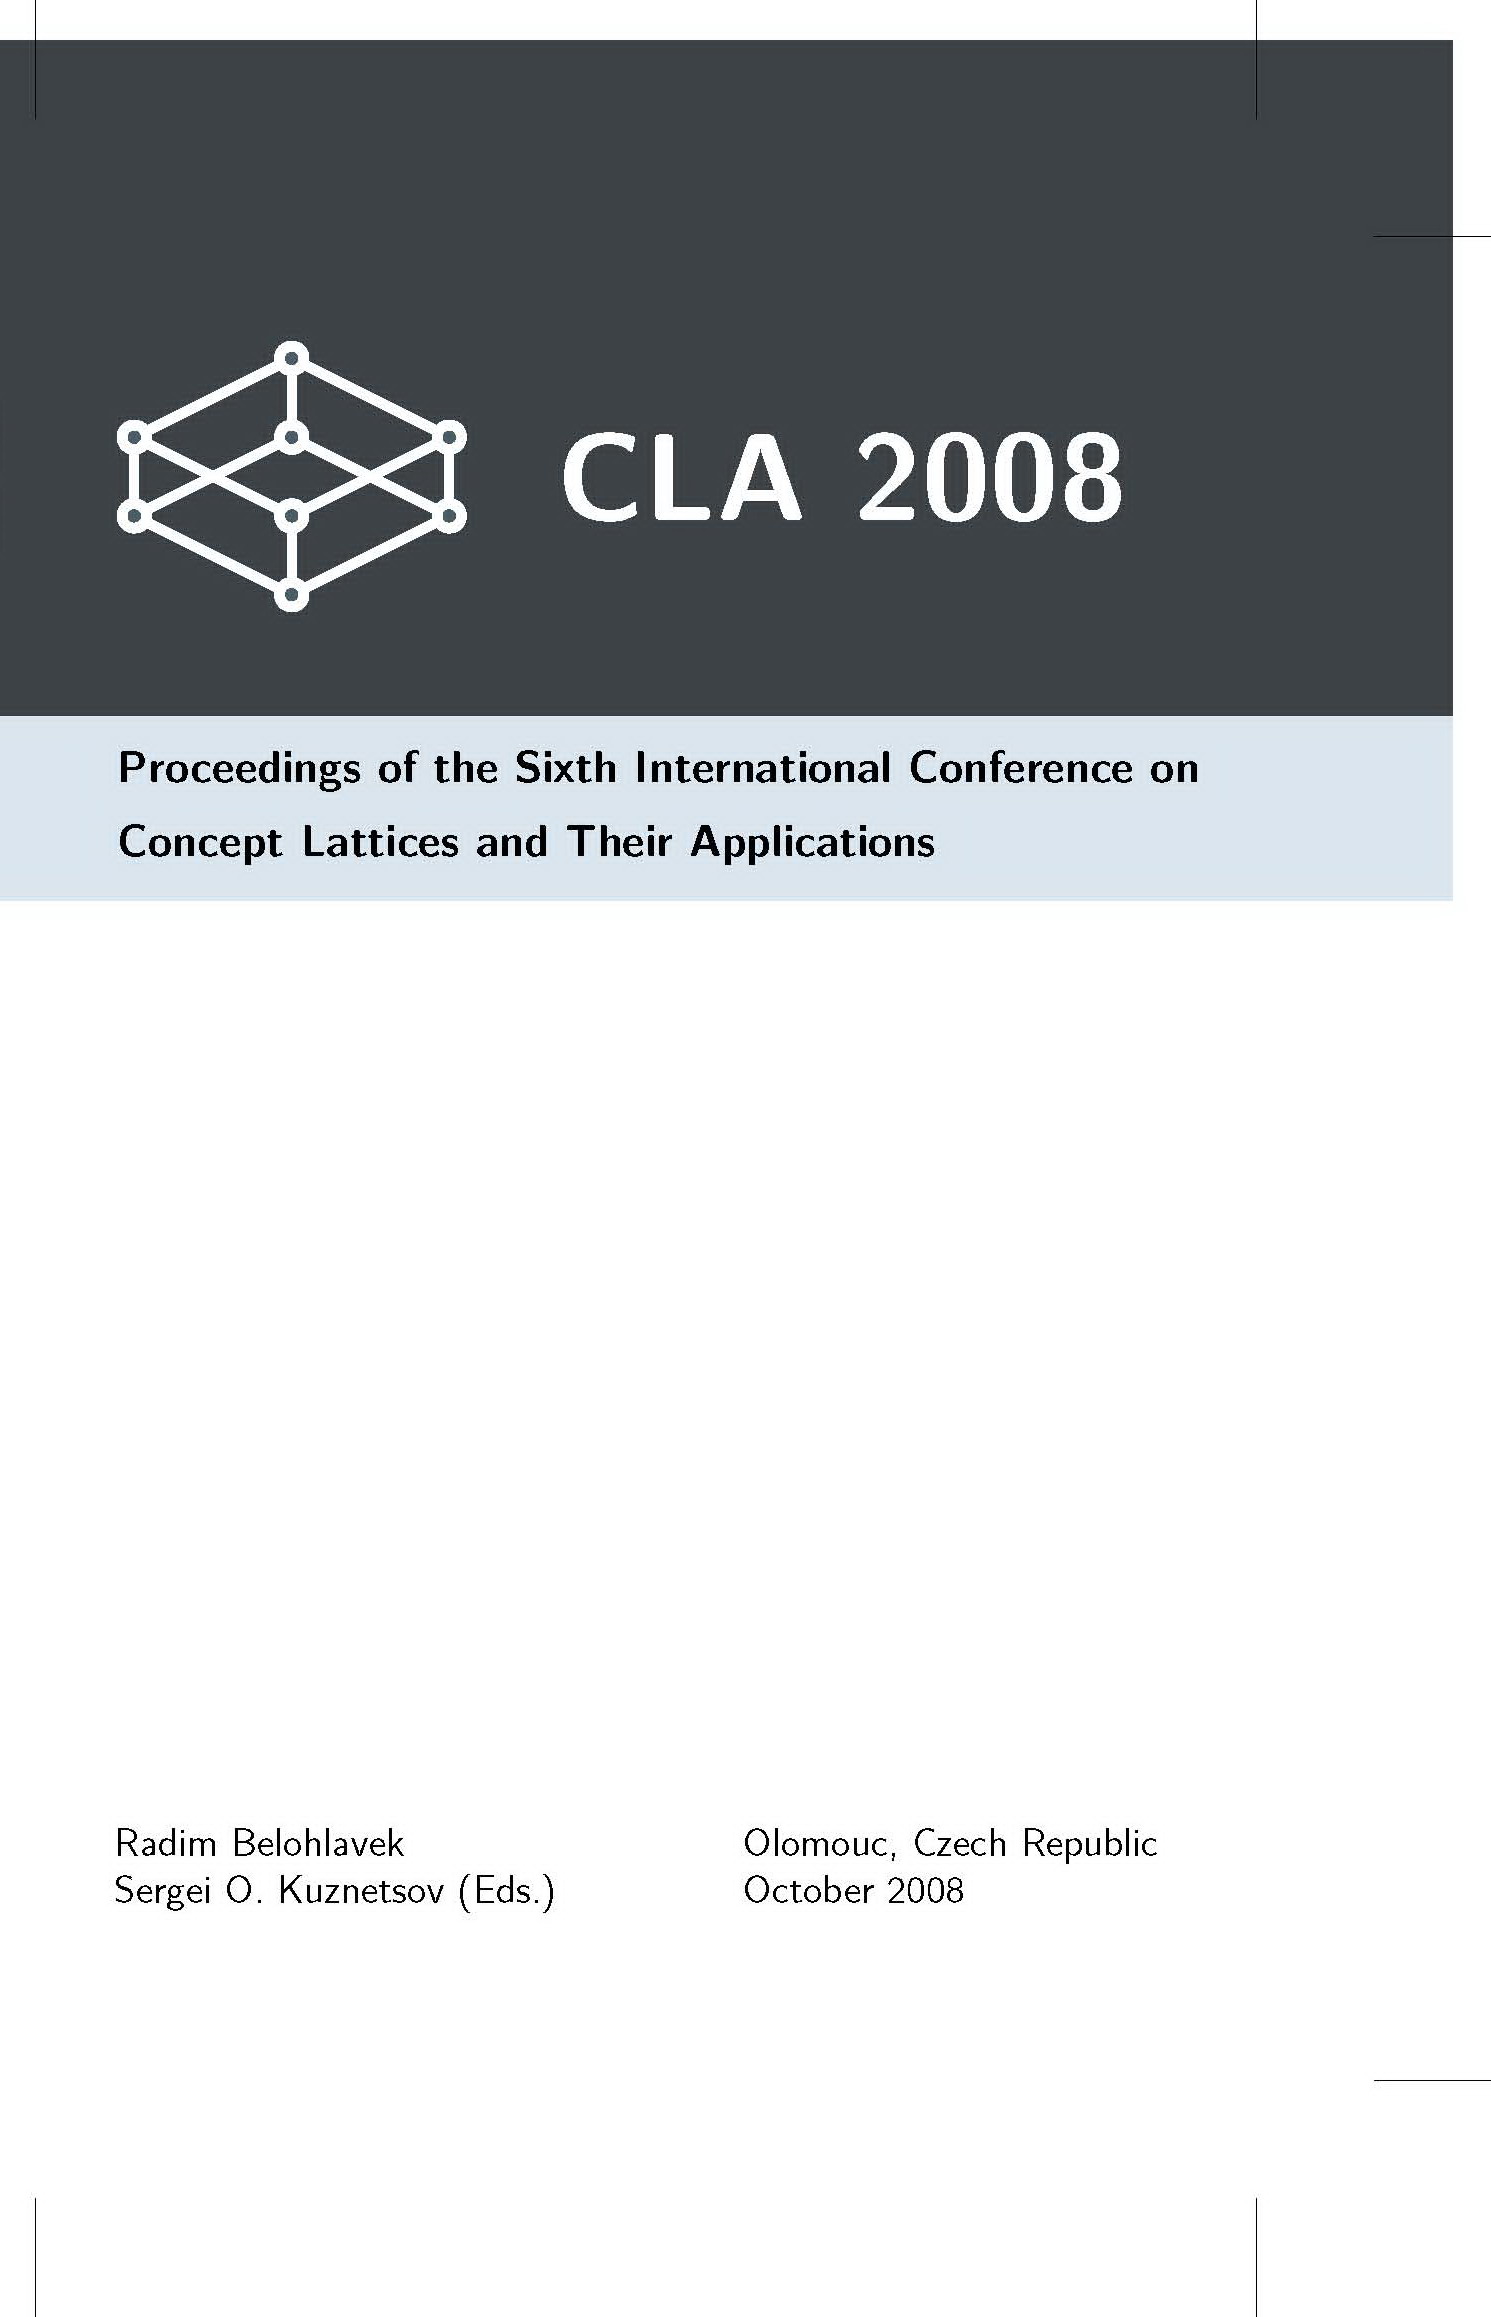 CLA 2008. Proceedings of the Sixth International Conference on Concept Lattices and Their Applications